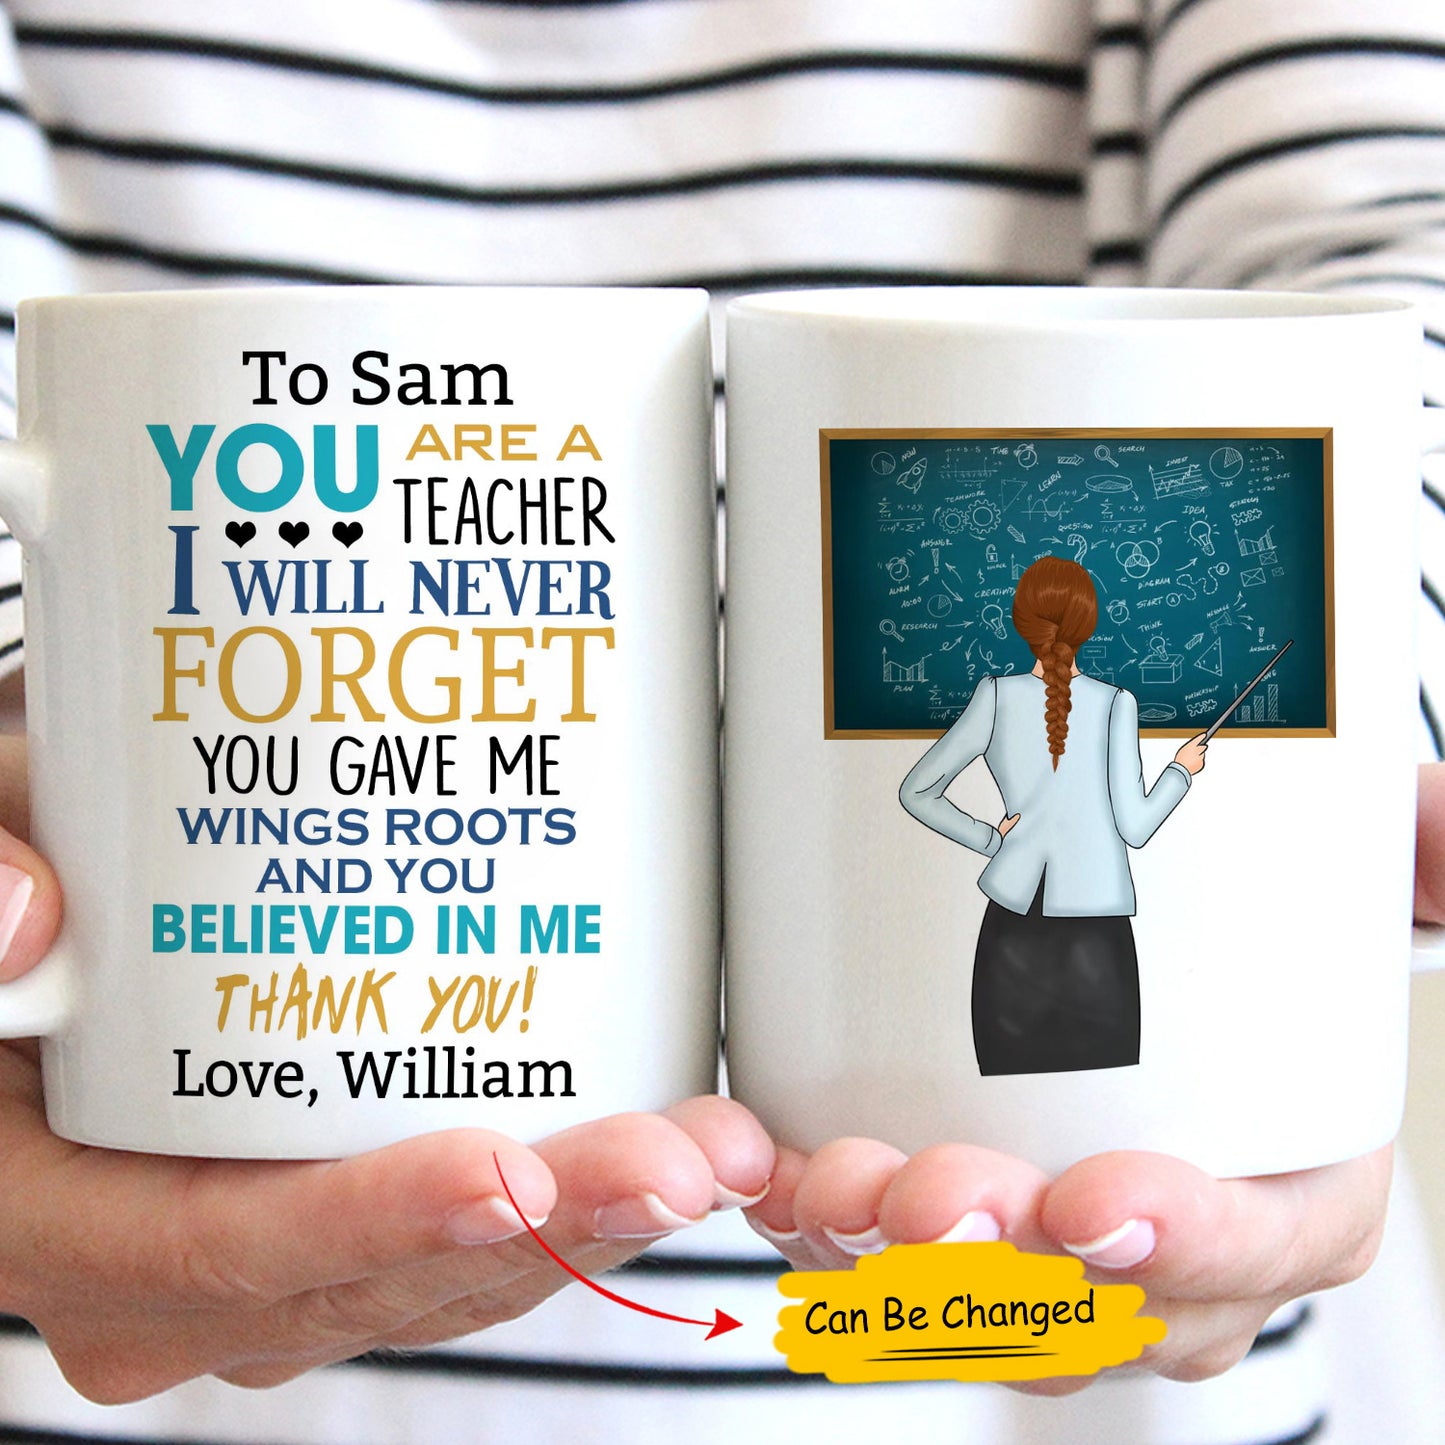 Custom Personalized Coffee mug graduation gifts for him & her, best college, high school grad presents for girls, boys, friends - You Are A Teacher I Will Never Forget HT120411 - PersonalizedWitch